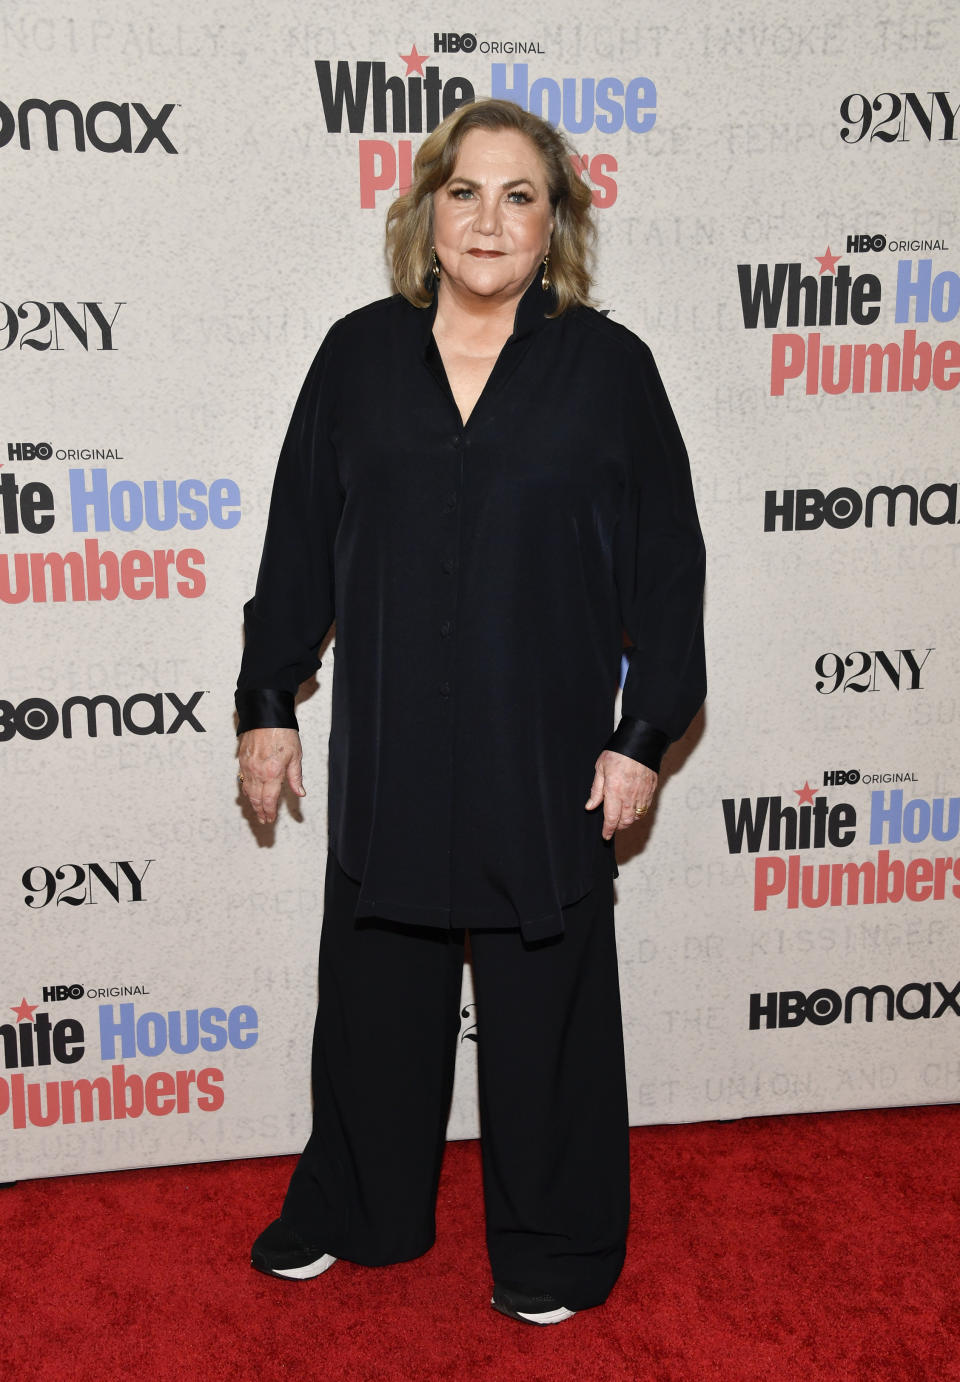 Kathleen Turner attends the premiere of HBO's "White House Plumbers" at the 92nd Street Y on Monday, April 17, 2023, in New York. (Photo by Evan Agostini/Invision/AP)